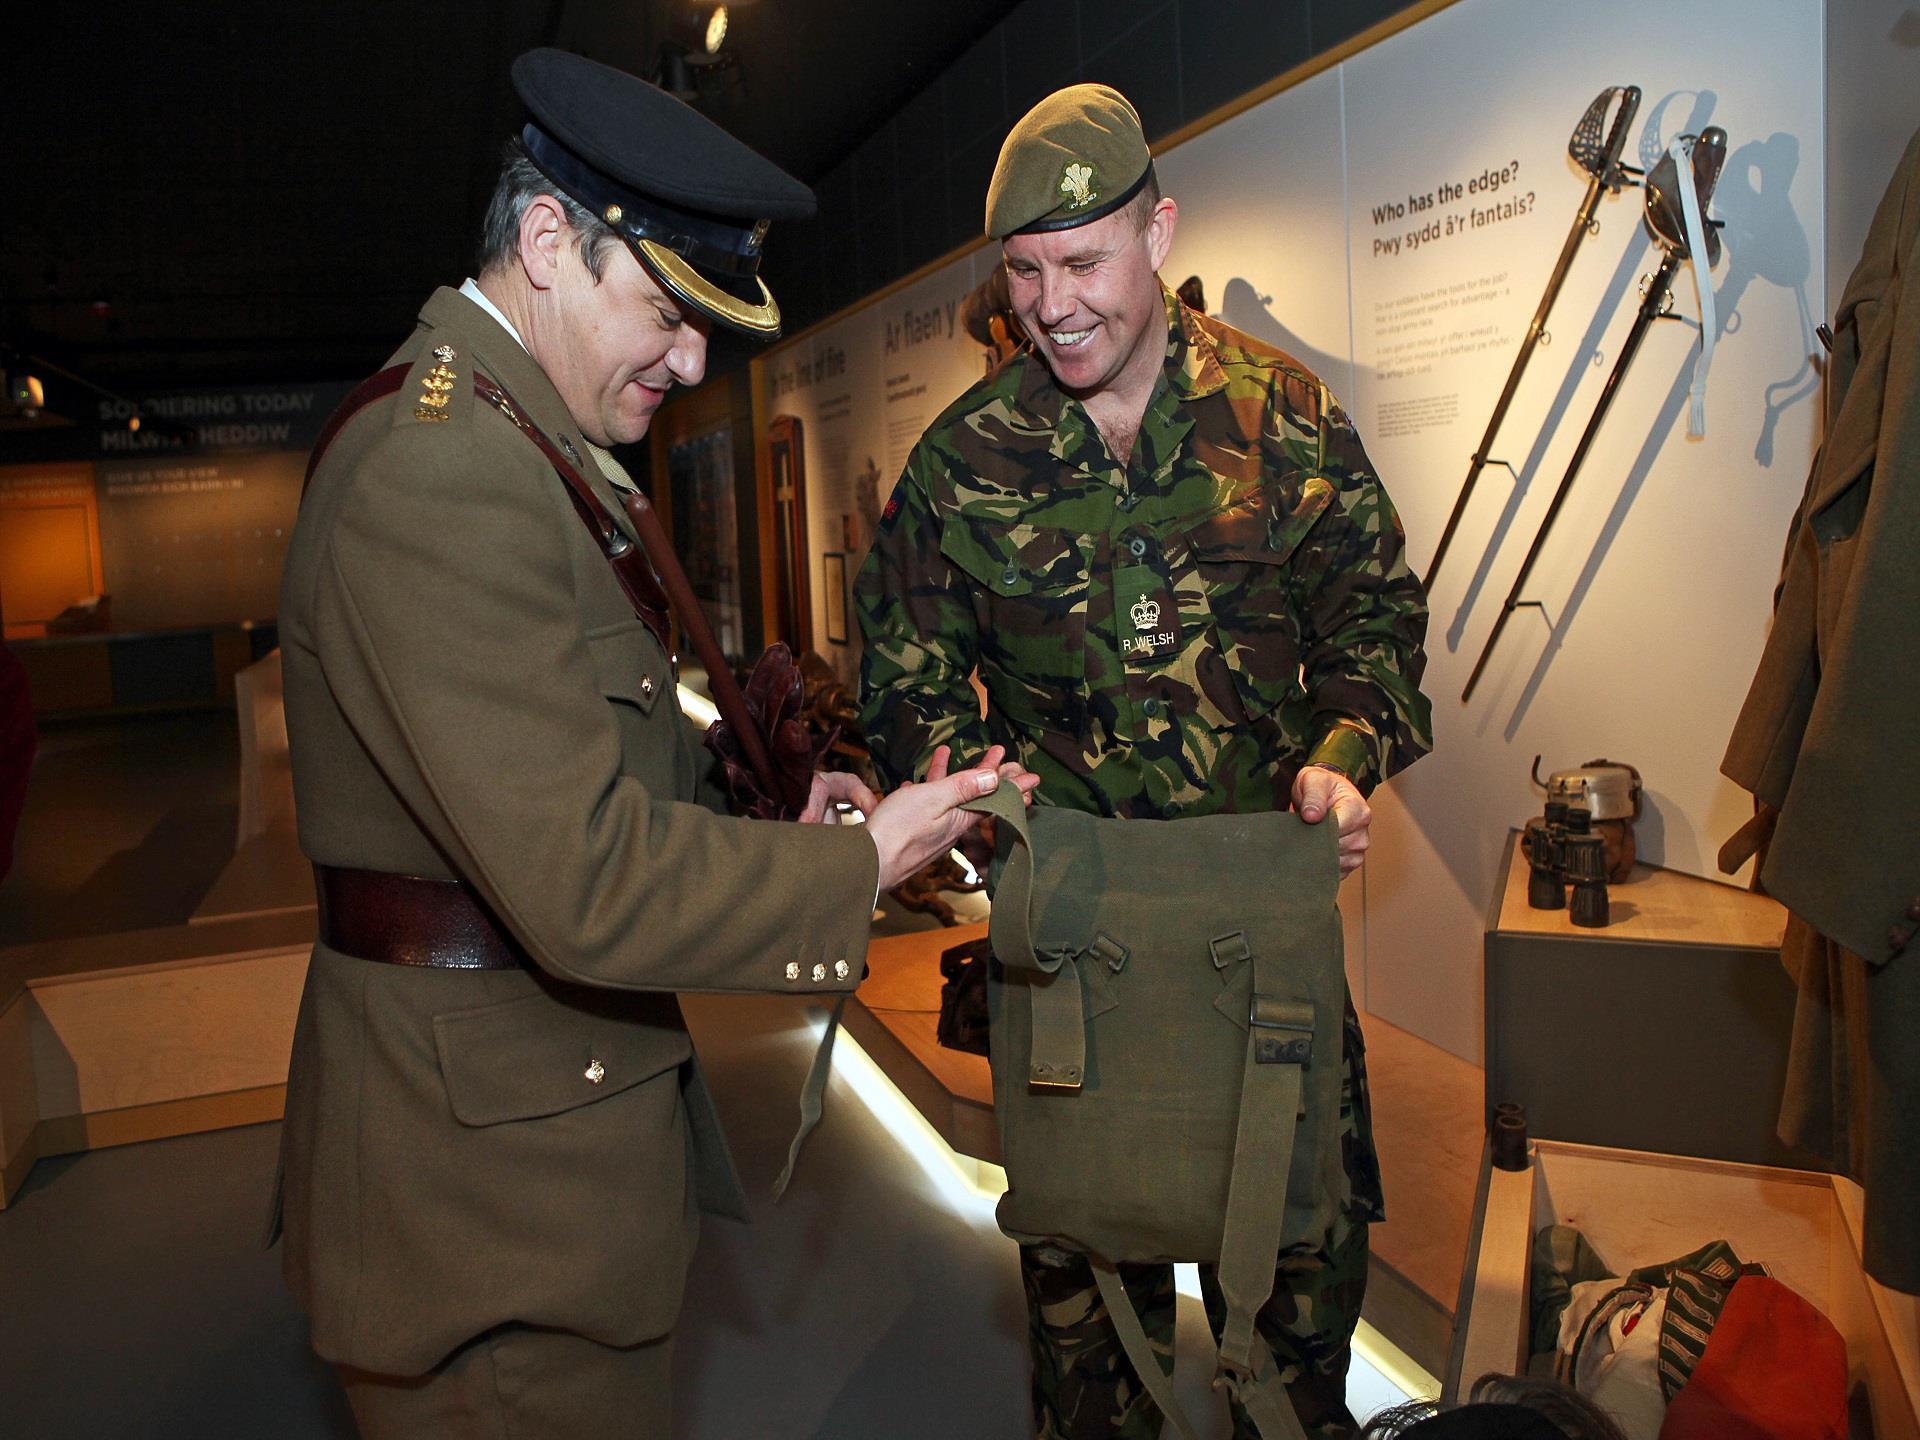 The museum brings military history to life